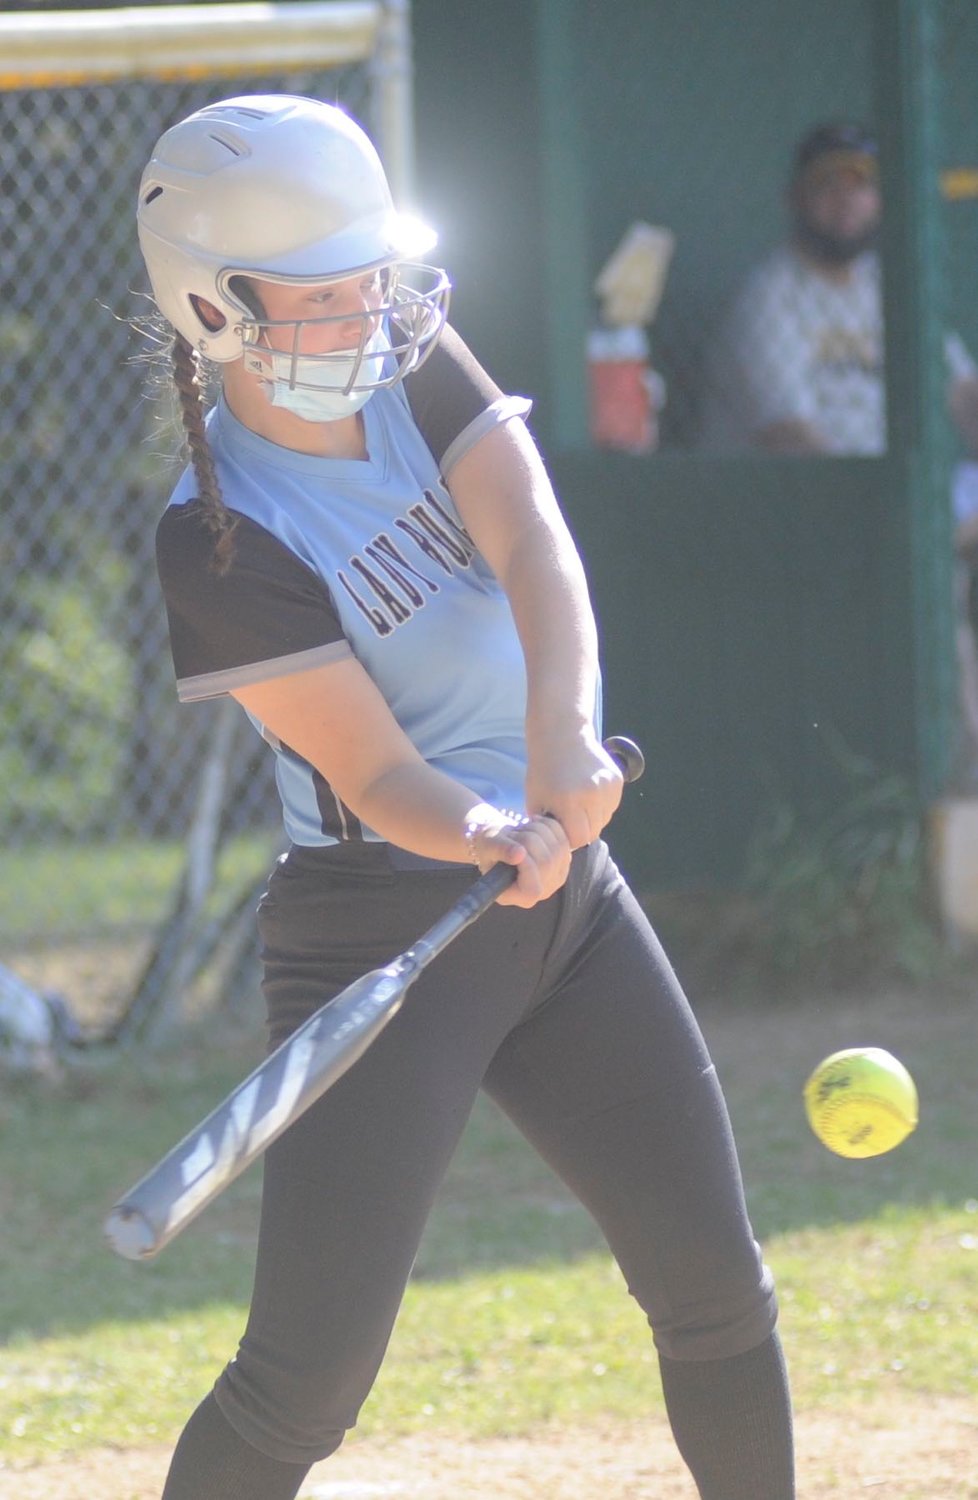 Missed connection. Sullivan West’s Felicity Bauernfeind came close to tagging a Donnelly curveball.